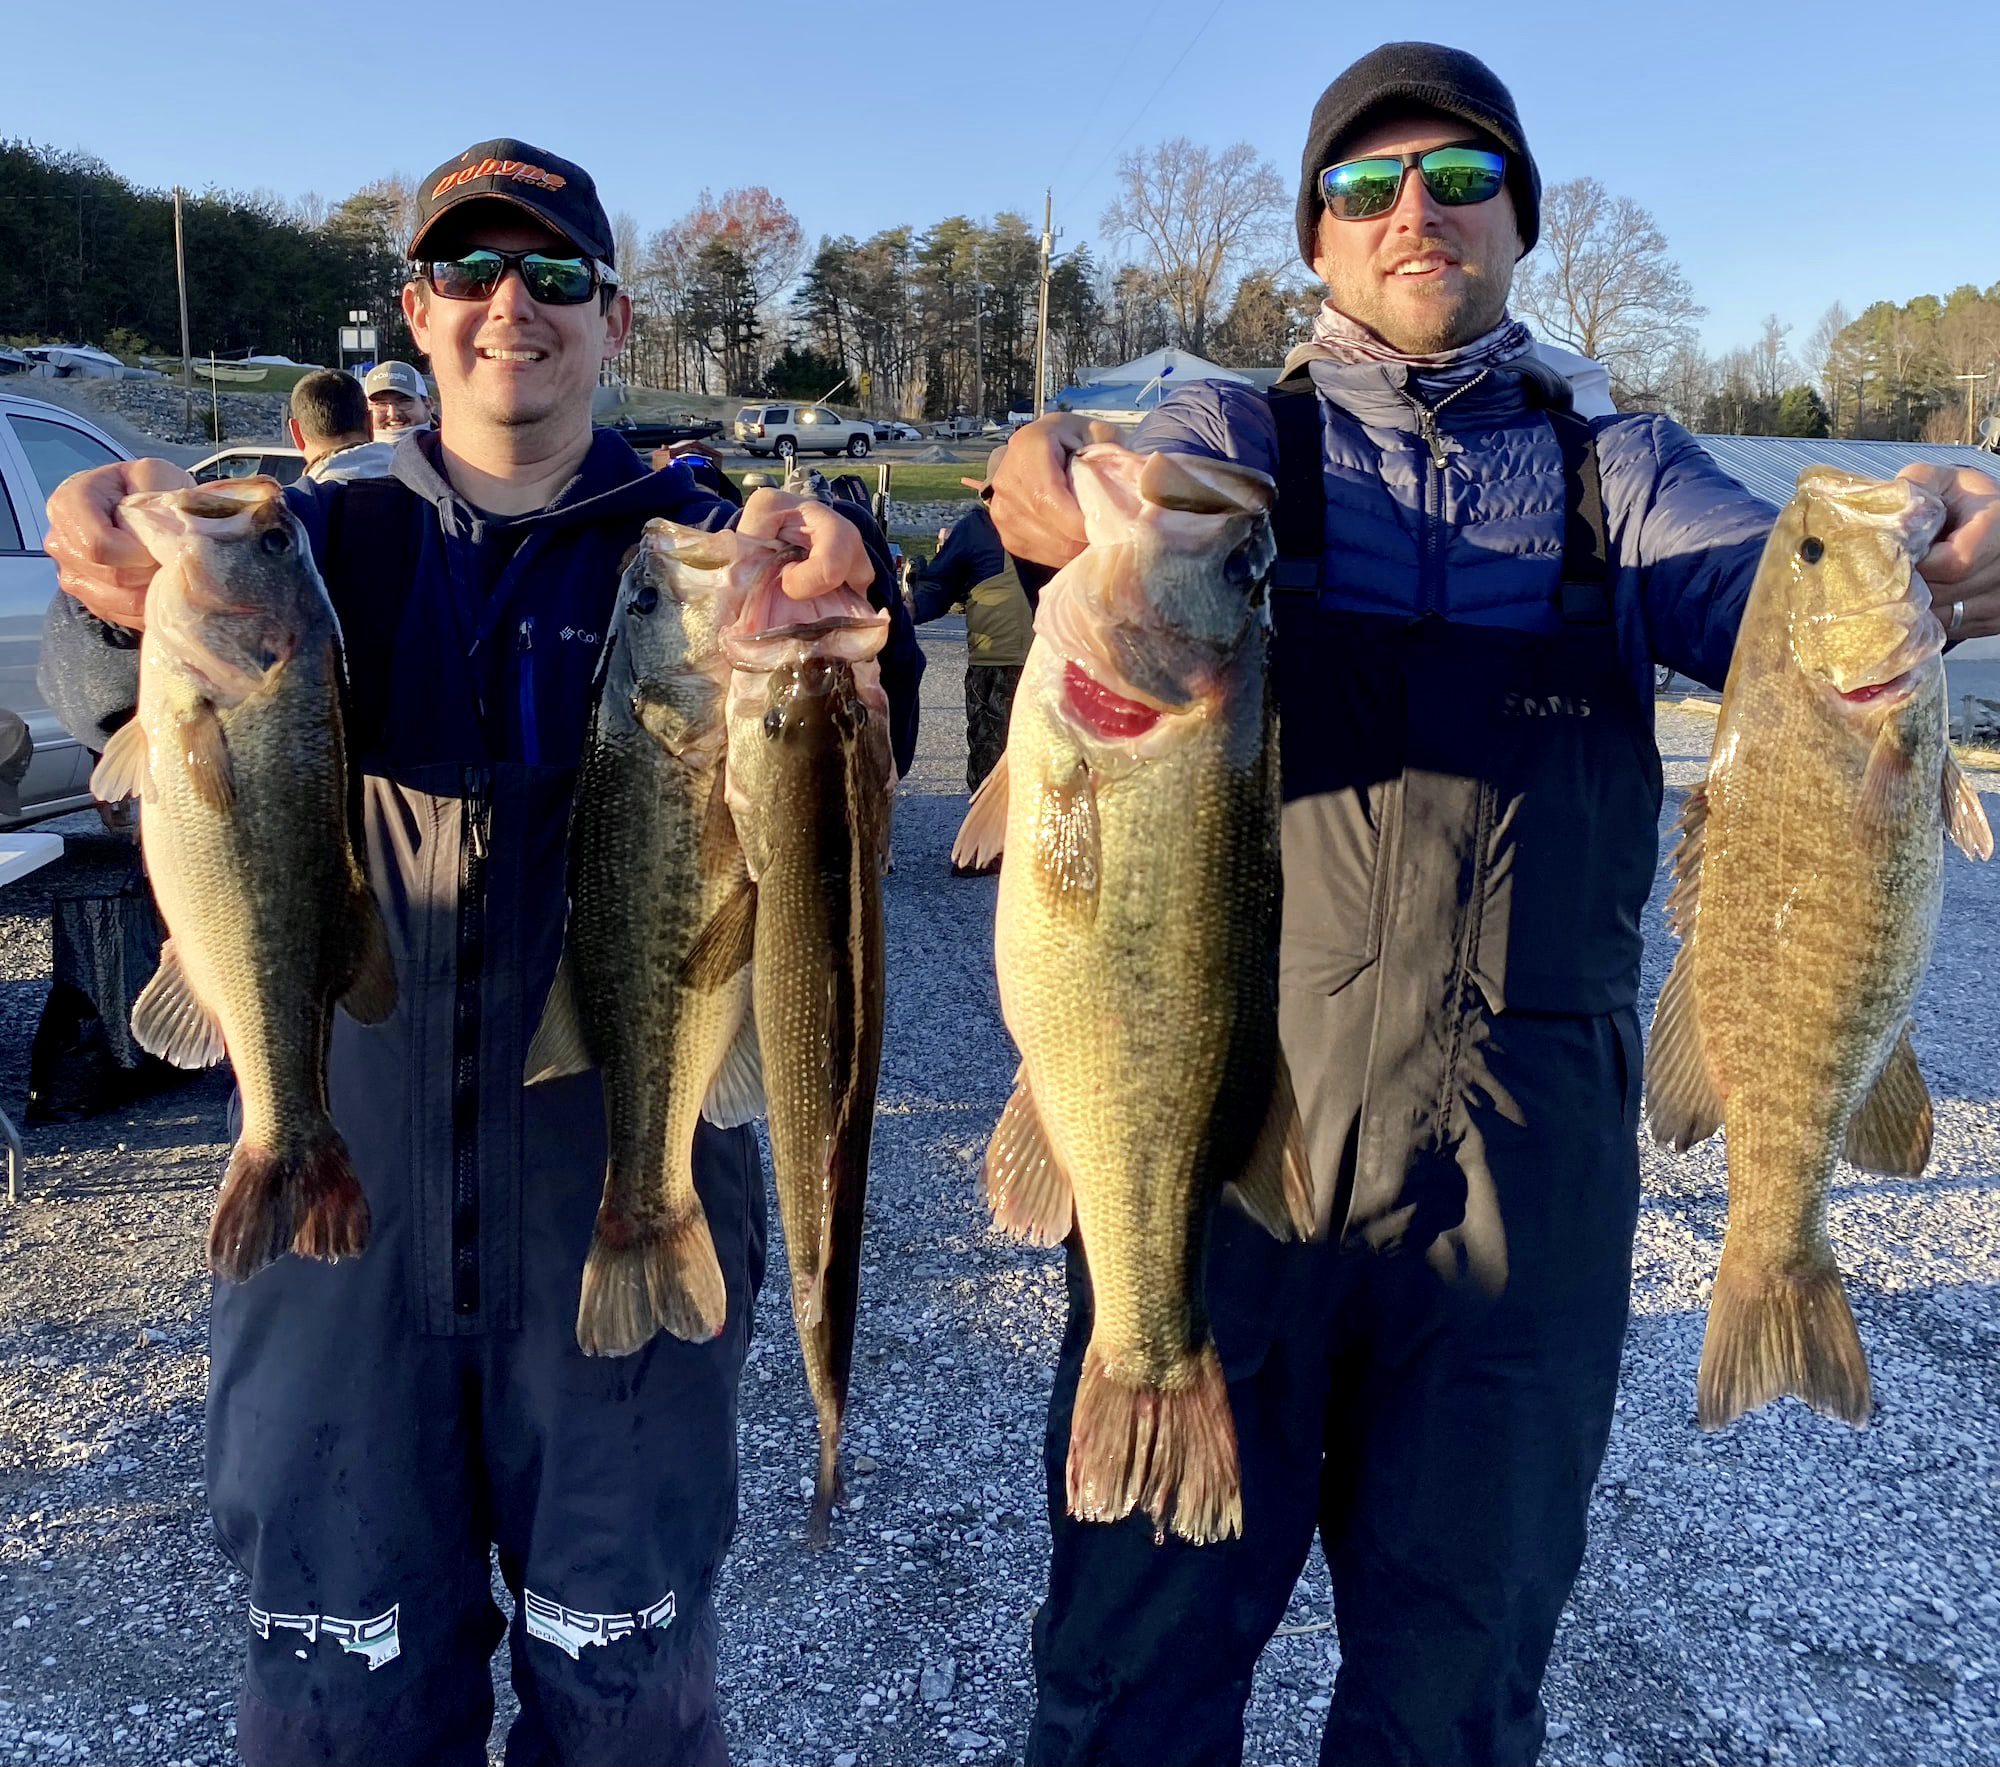 Billy Kohls & Will Petty Win Catt Smith Mountain Lake Dec 6th 2020 with 24.02lbs